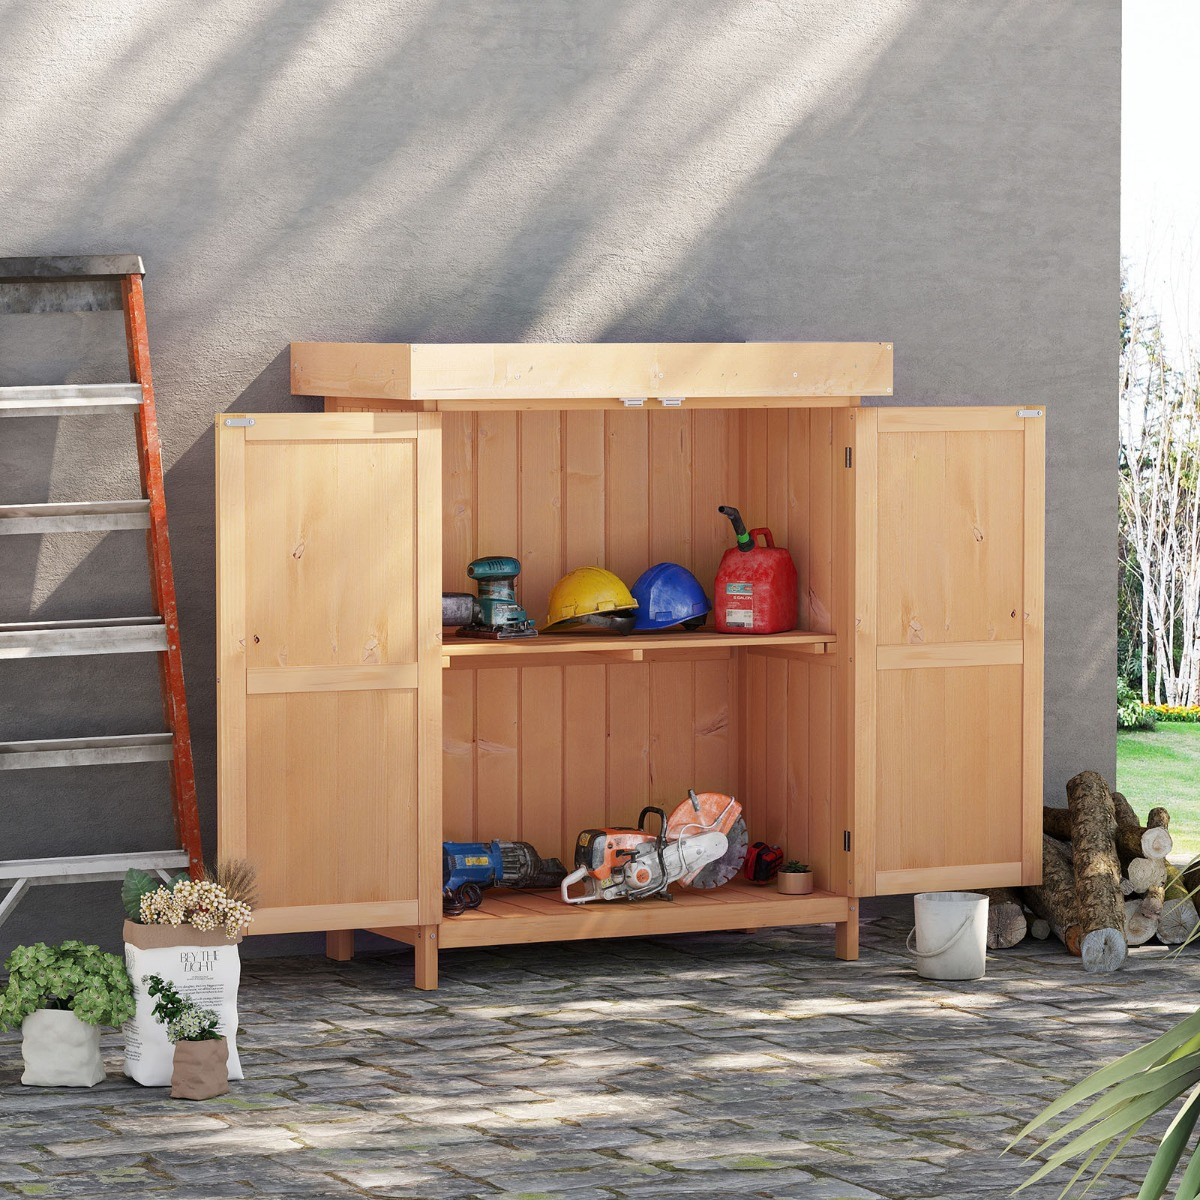 Outsunny Wooden Garden Storage Shed Cabinet - Natural Wood>